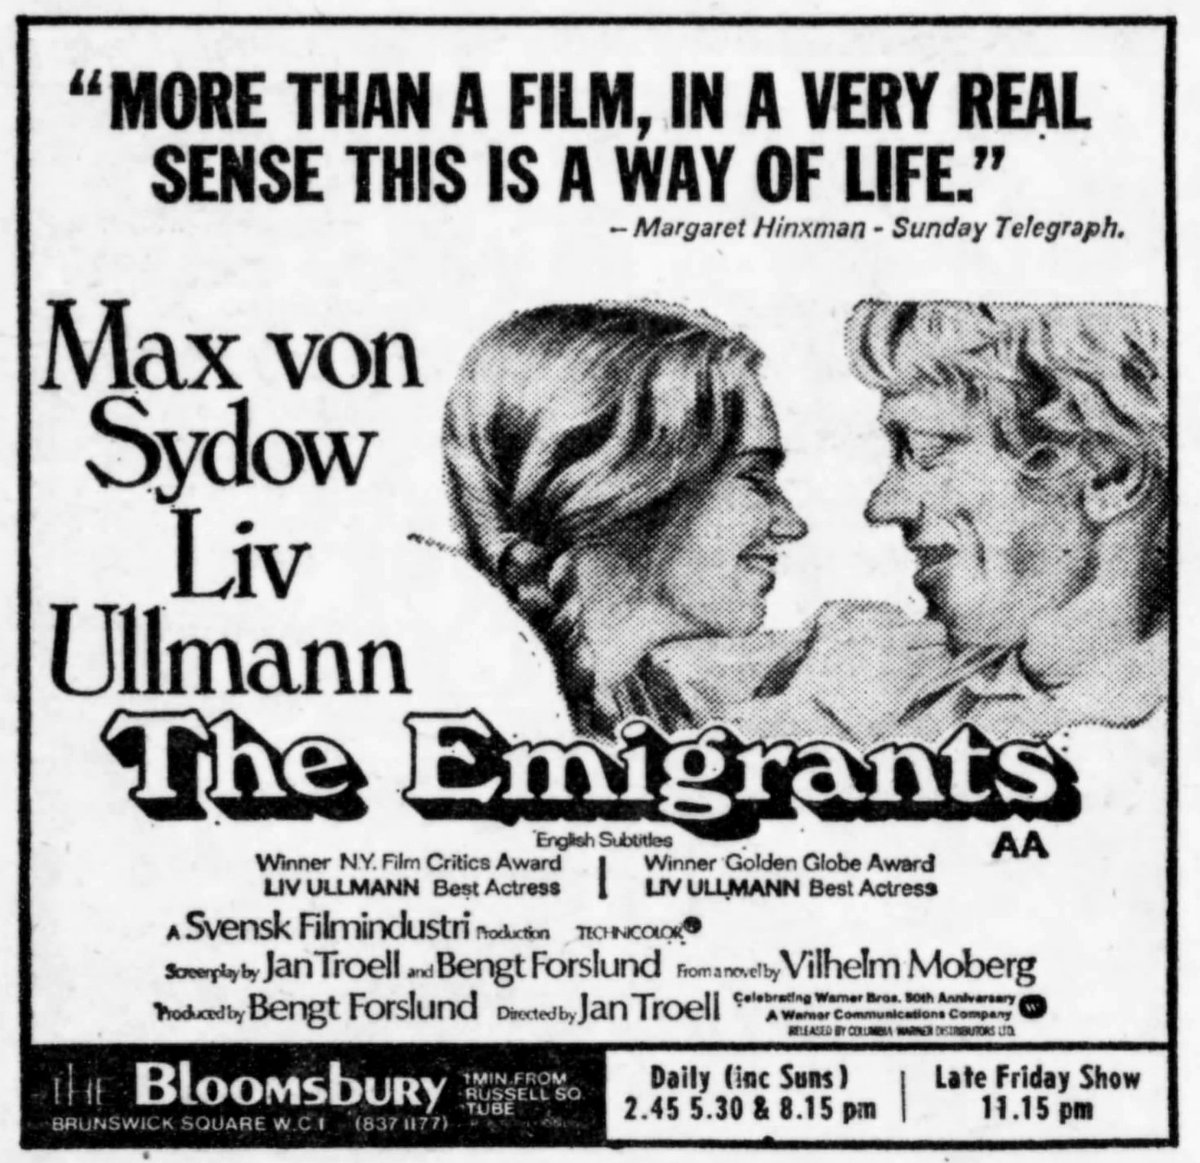 On this day, May 24th, 1973, THE EMIGRANTS, starring Max von Sydow and Liv Ullmann opened in London..